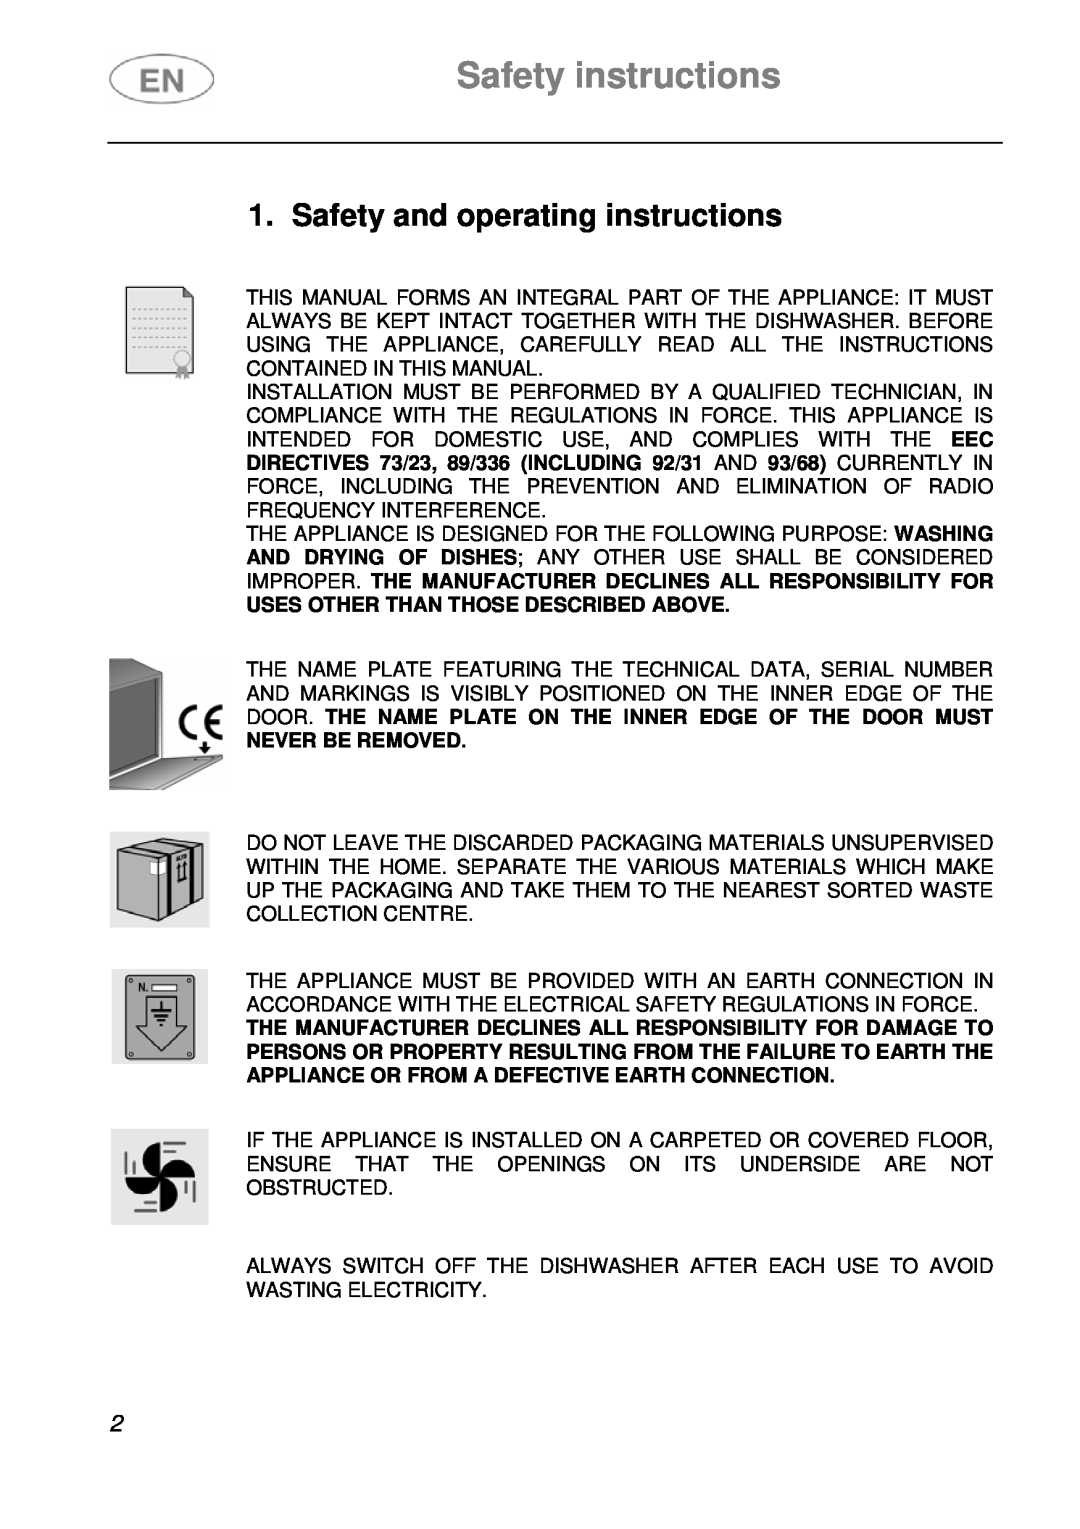 Smeg DF410BL1 instruction manual Safety instructions, Safety and operating instructions 